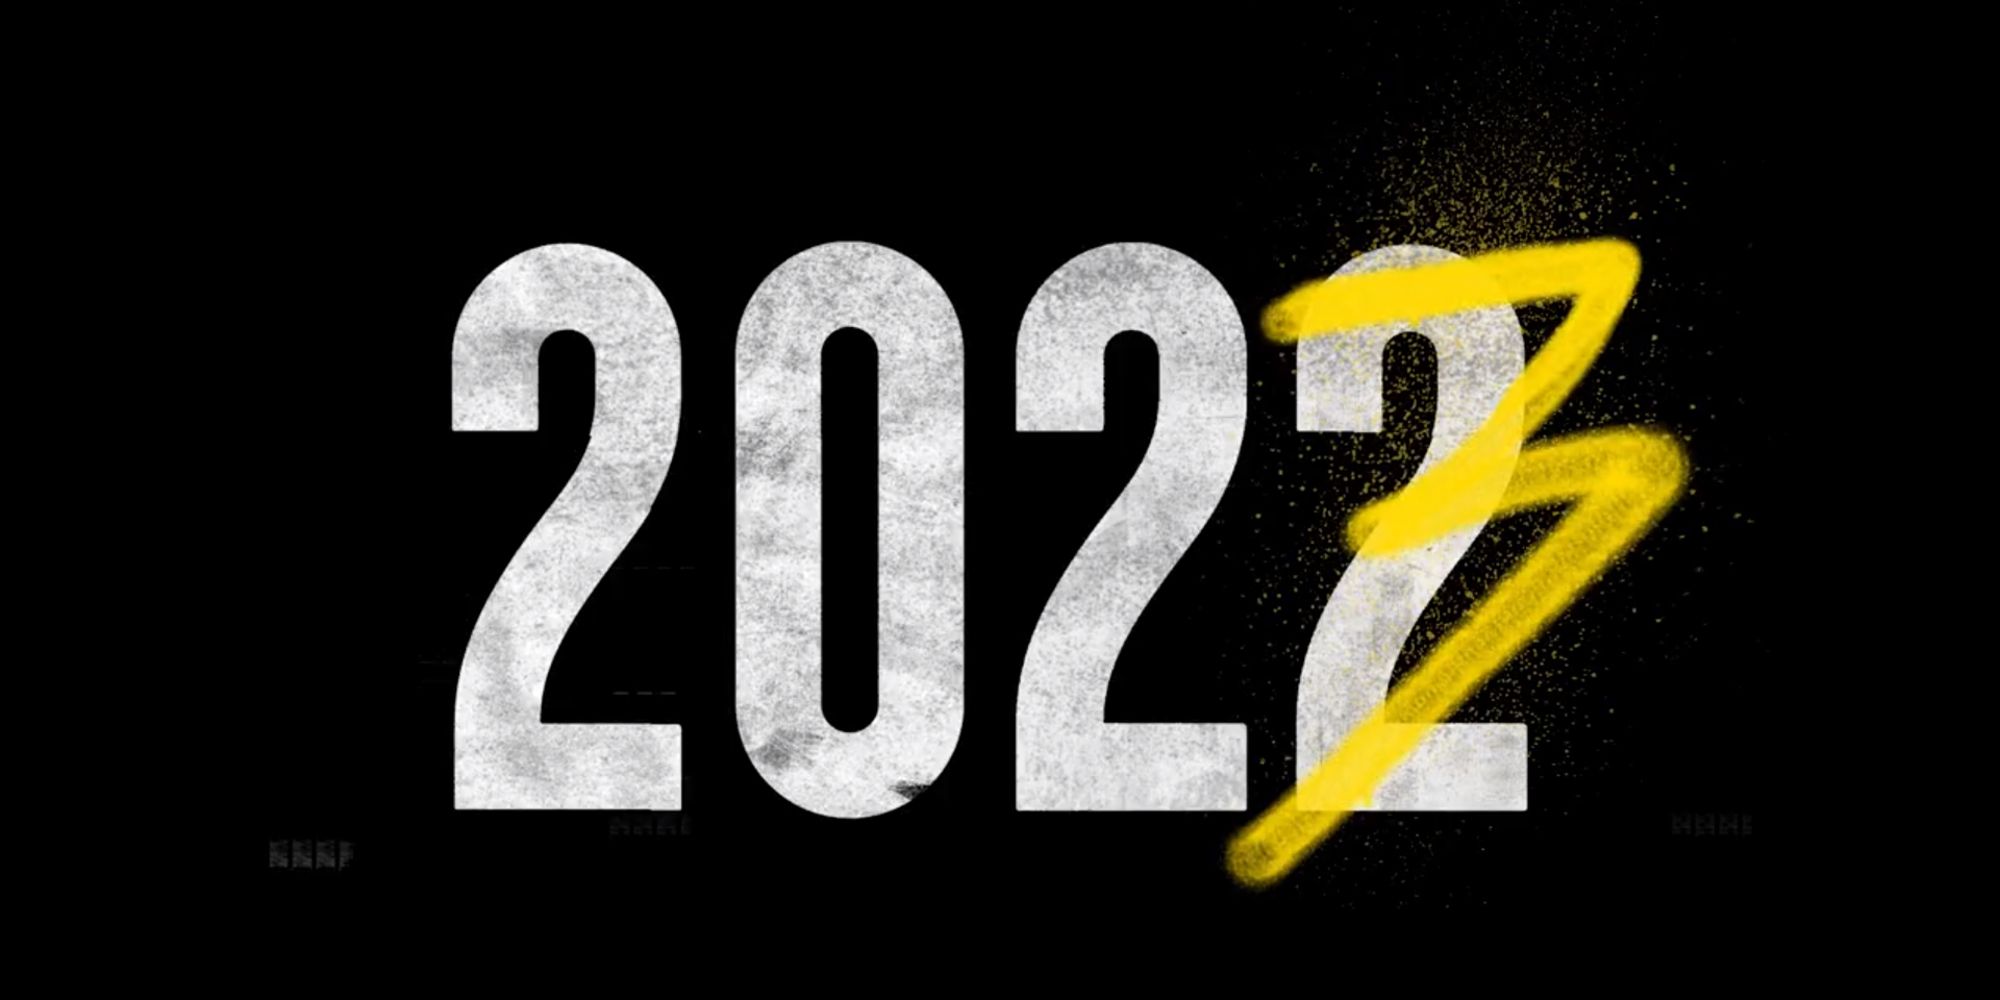 2022 being changed to 2023 in Suicide Squad Kill The Justice League